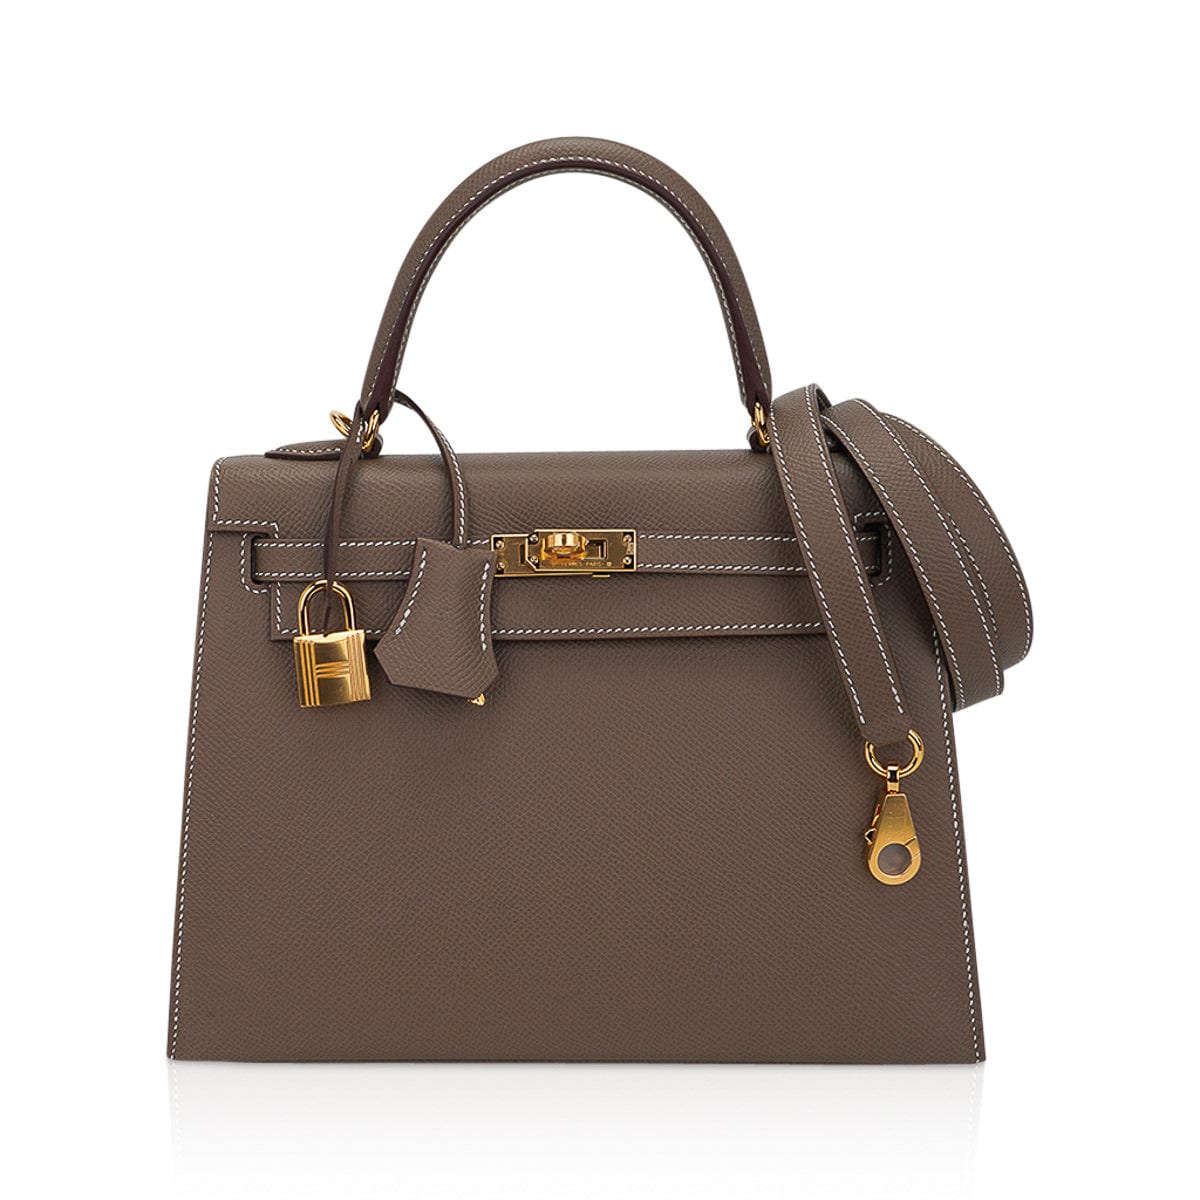 Hermes Kelly 25 Sellier Bag Etoupe Epsom Leather with Gold